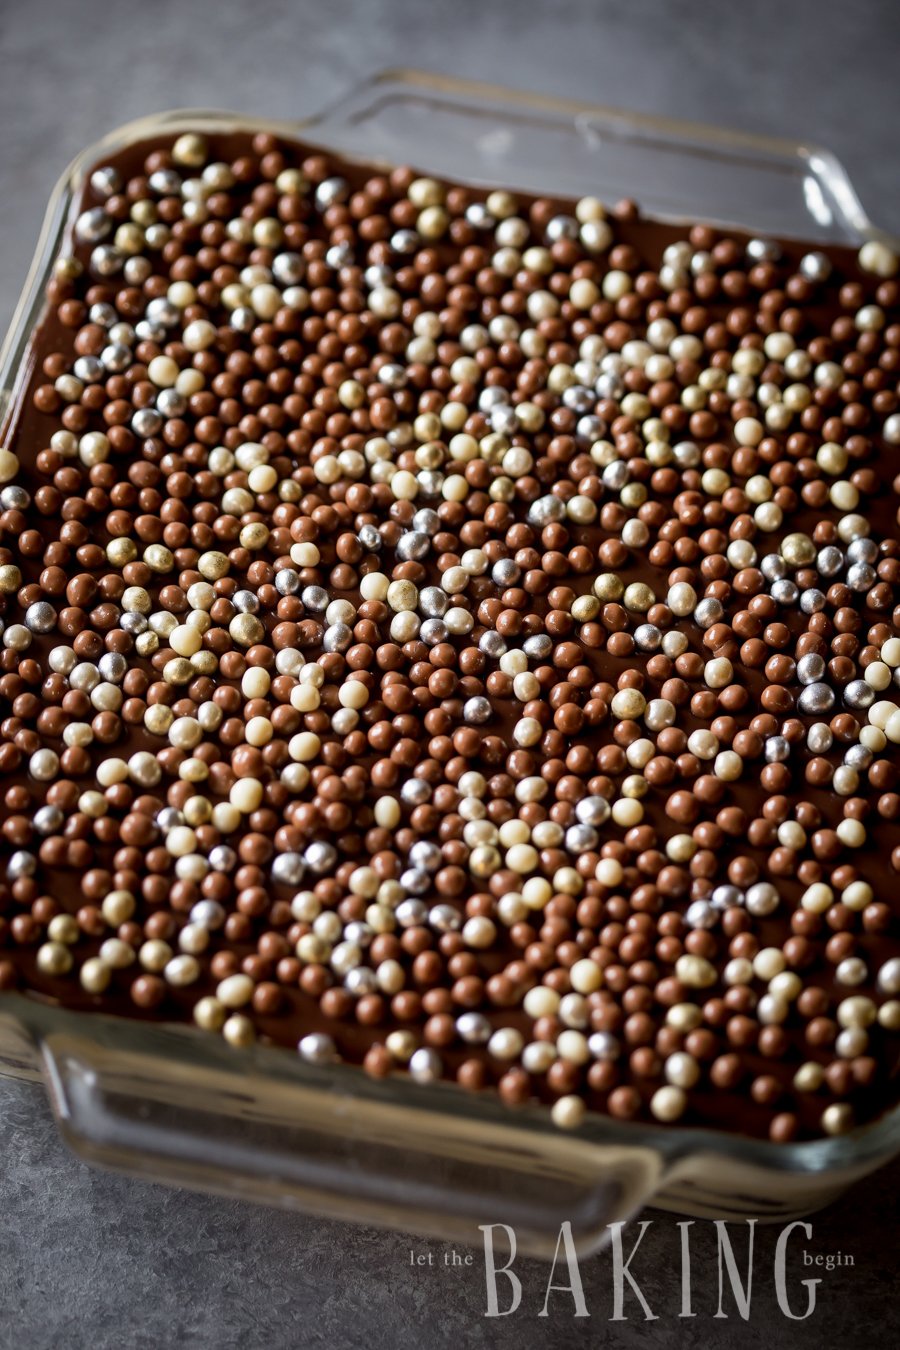 Top view of cake topped with pearls in a baking pan.